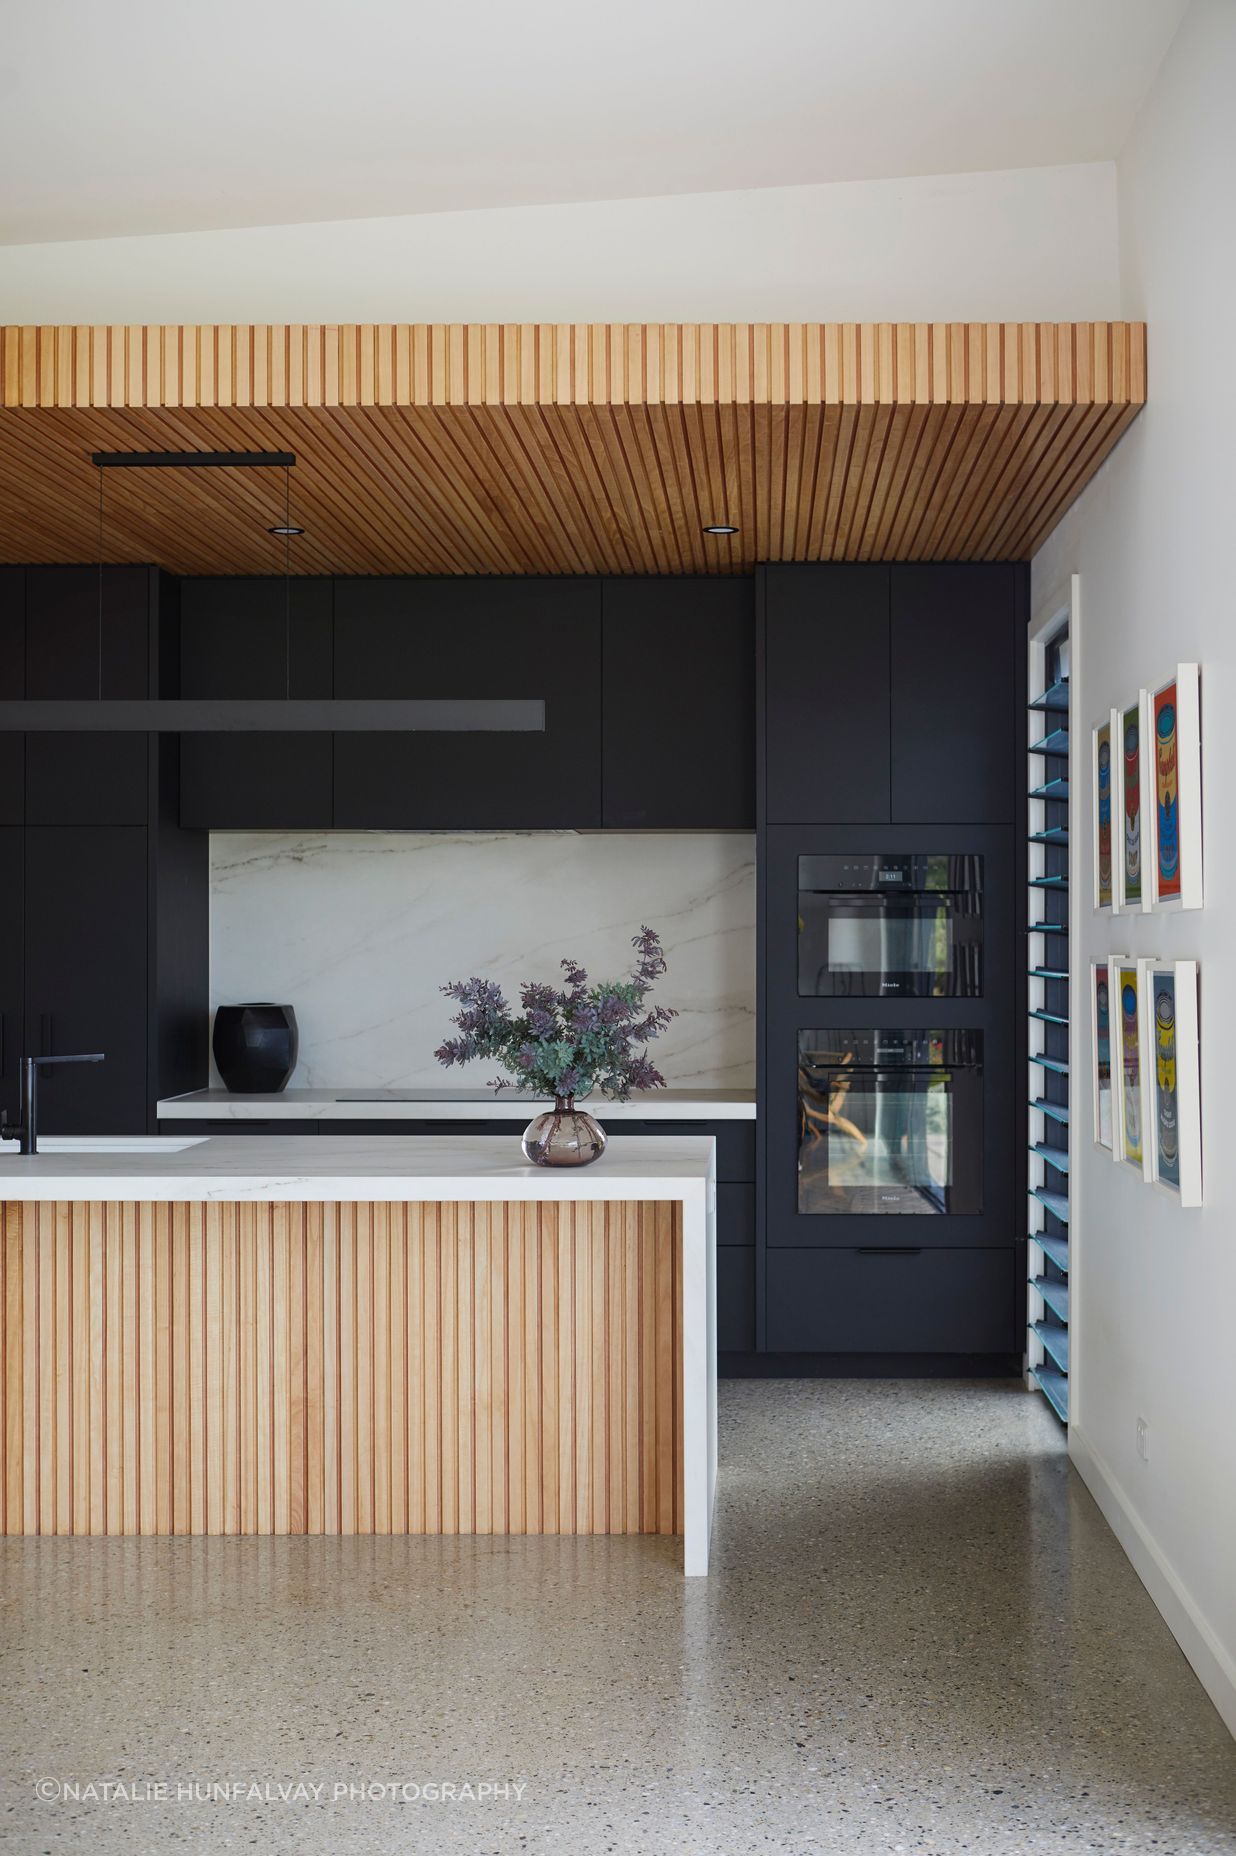 The black cabinetry adds mood and depth to the kitchen.